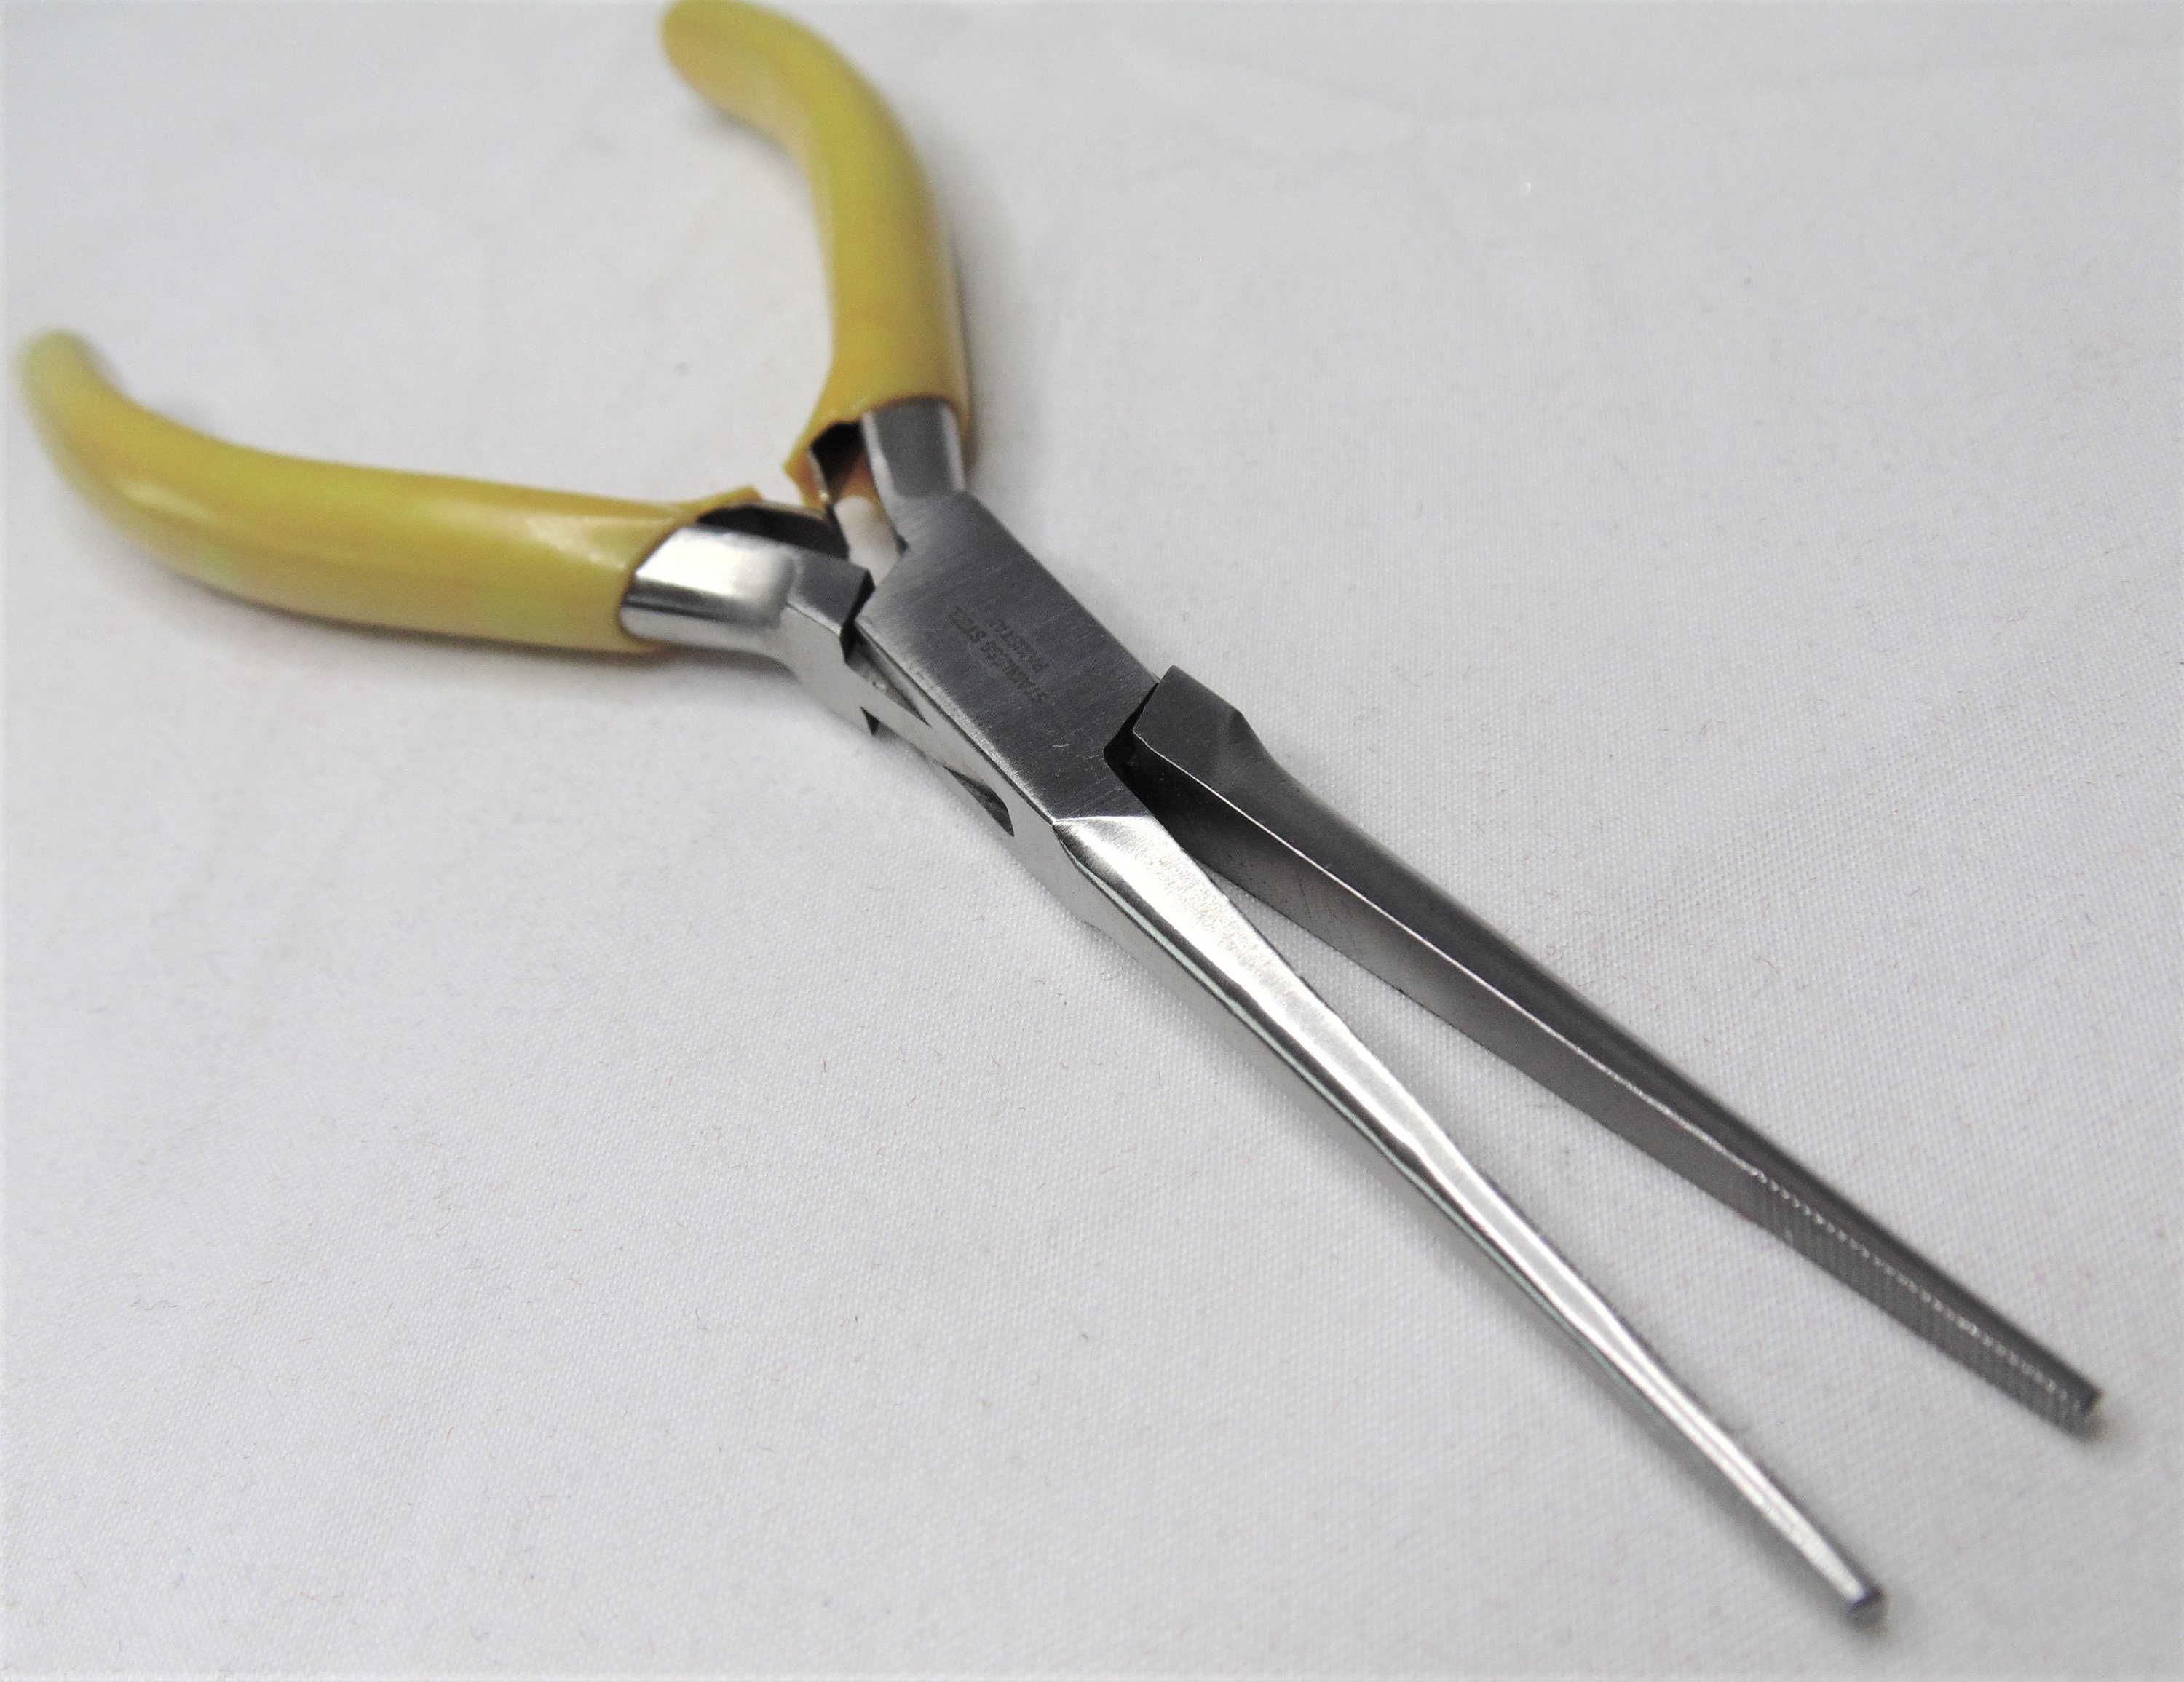 140mm Spring Loaded Extra Long Mini Needle Nose Pliers Plier Model Making  Precision Jewelry Wire Work Craft Carpentry Pliers Anti Slip Grips 